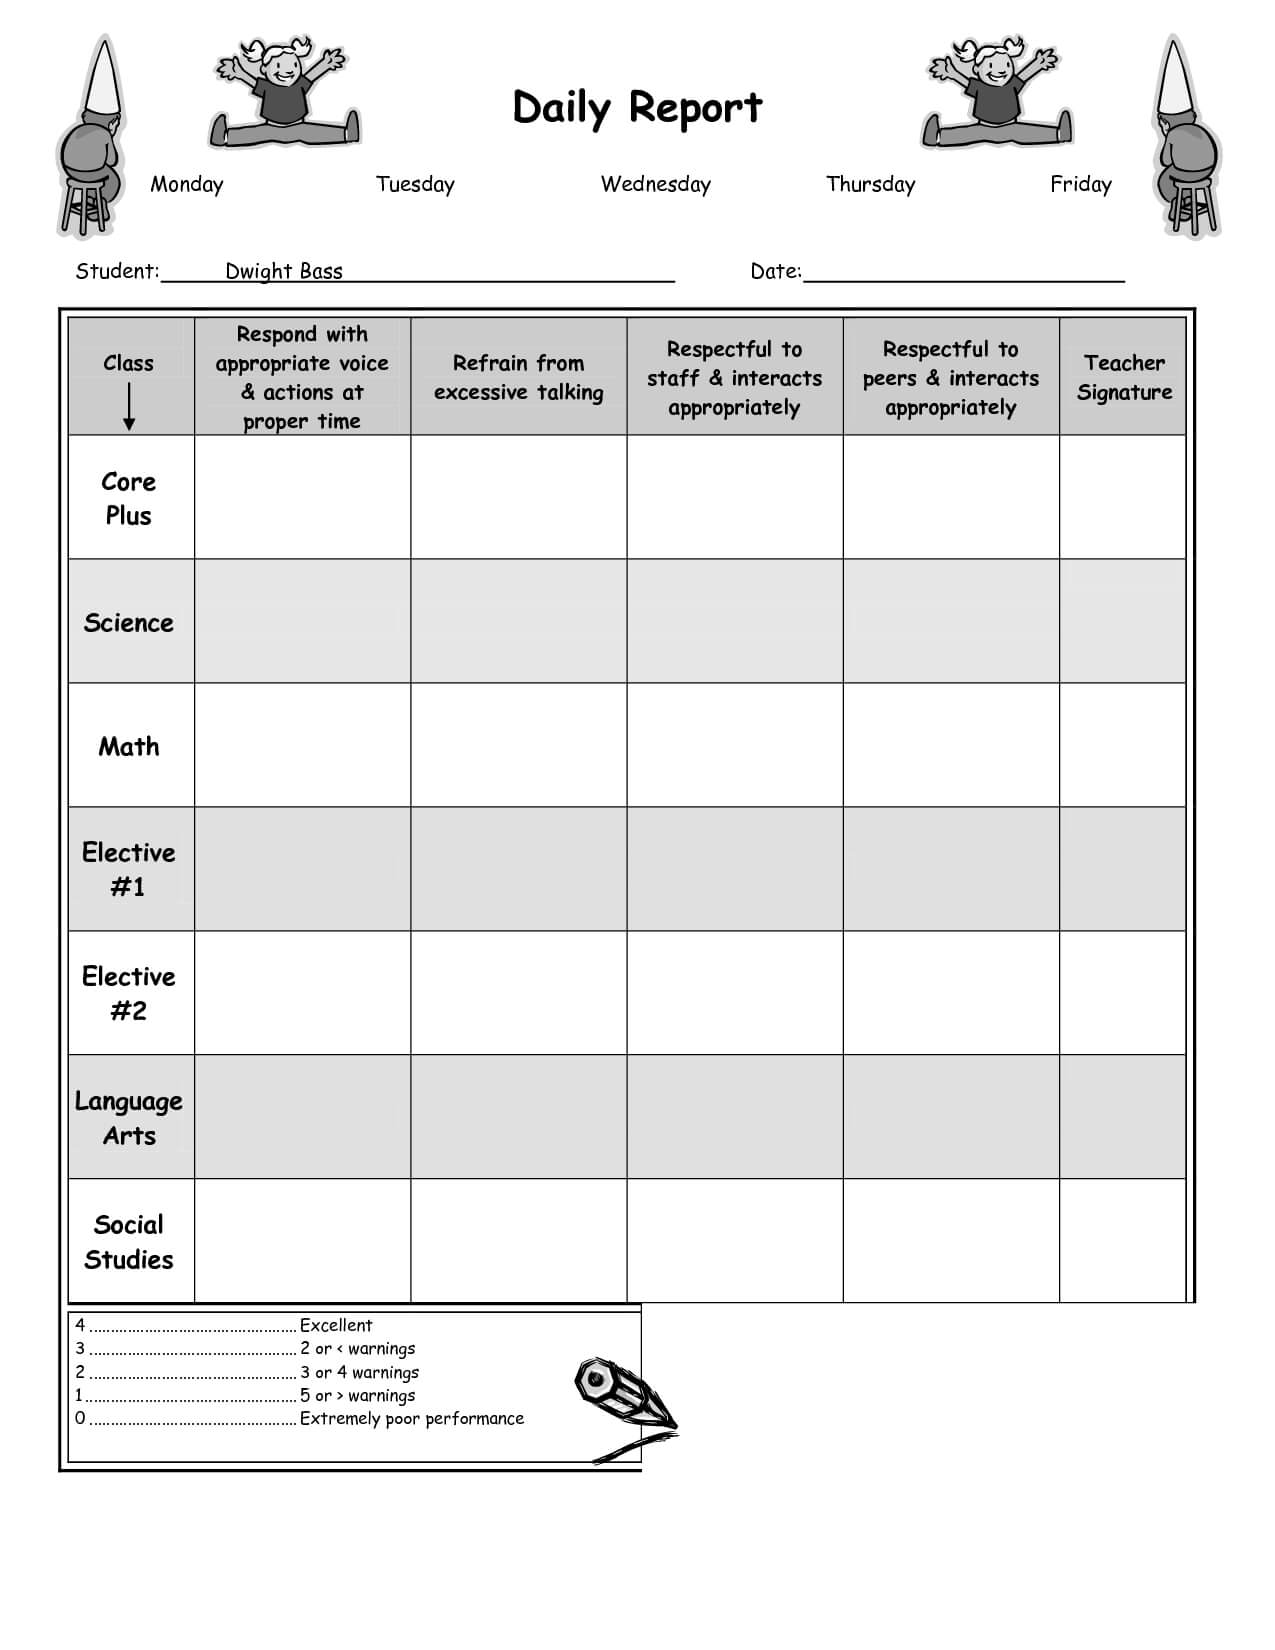 Daily Report Card Template For Adhd ] - Daily Behavior Inside Daily Report Card Template For Adhd